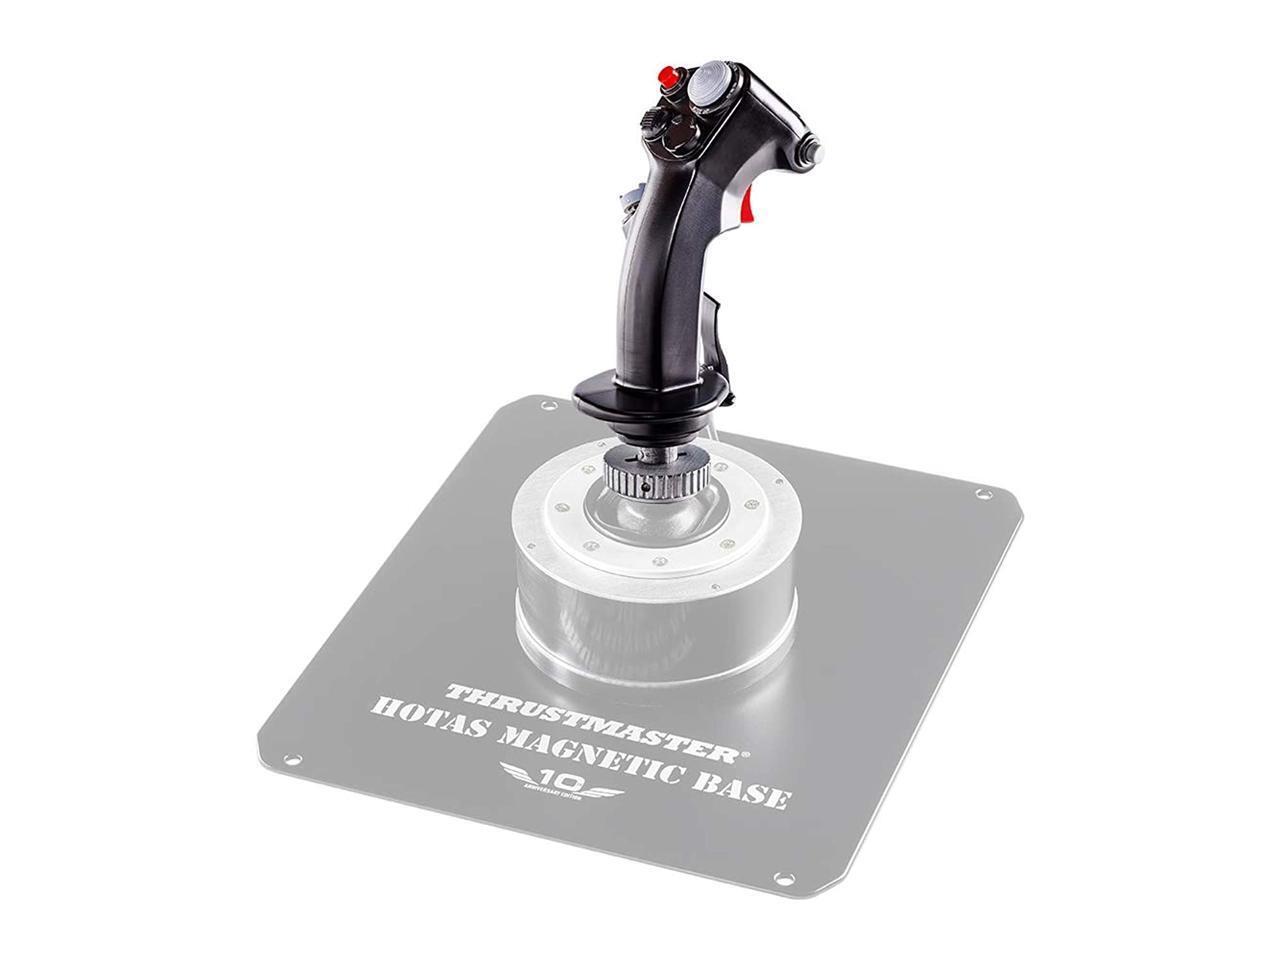 Thrustmaster F-16C Viper HOTAS Add-On Grip for PC, VR